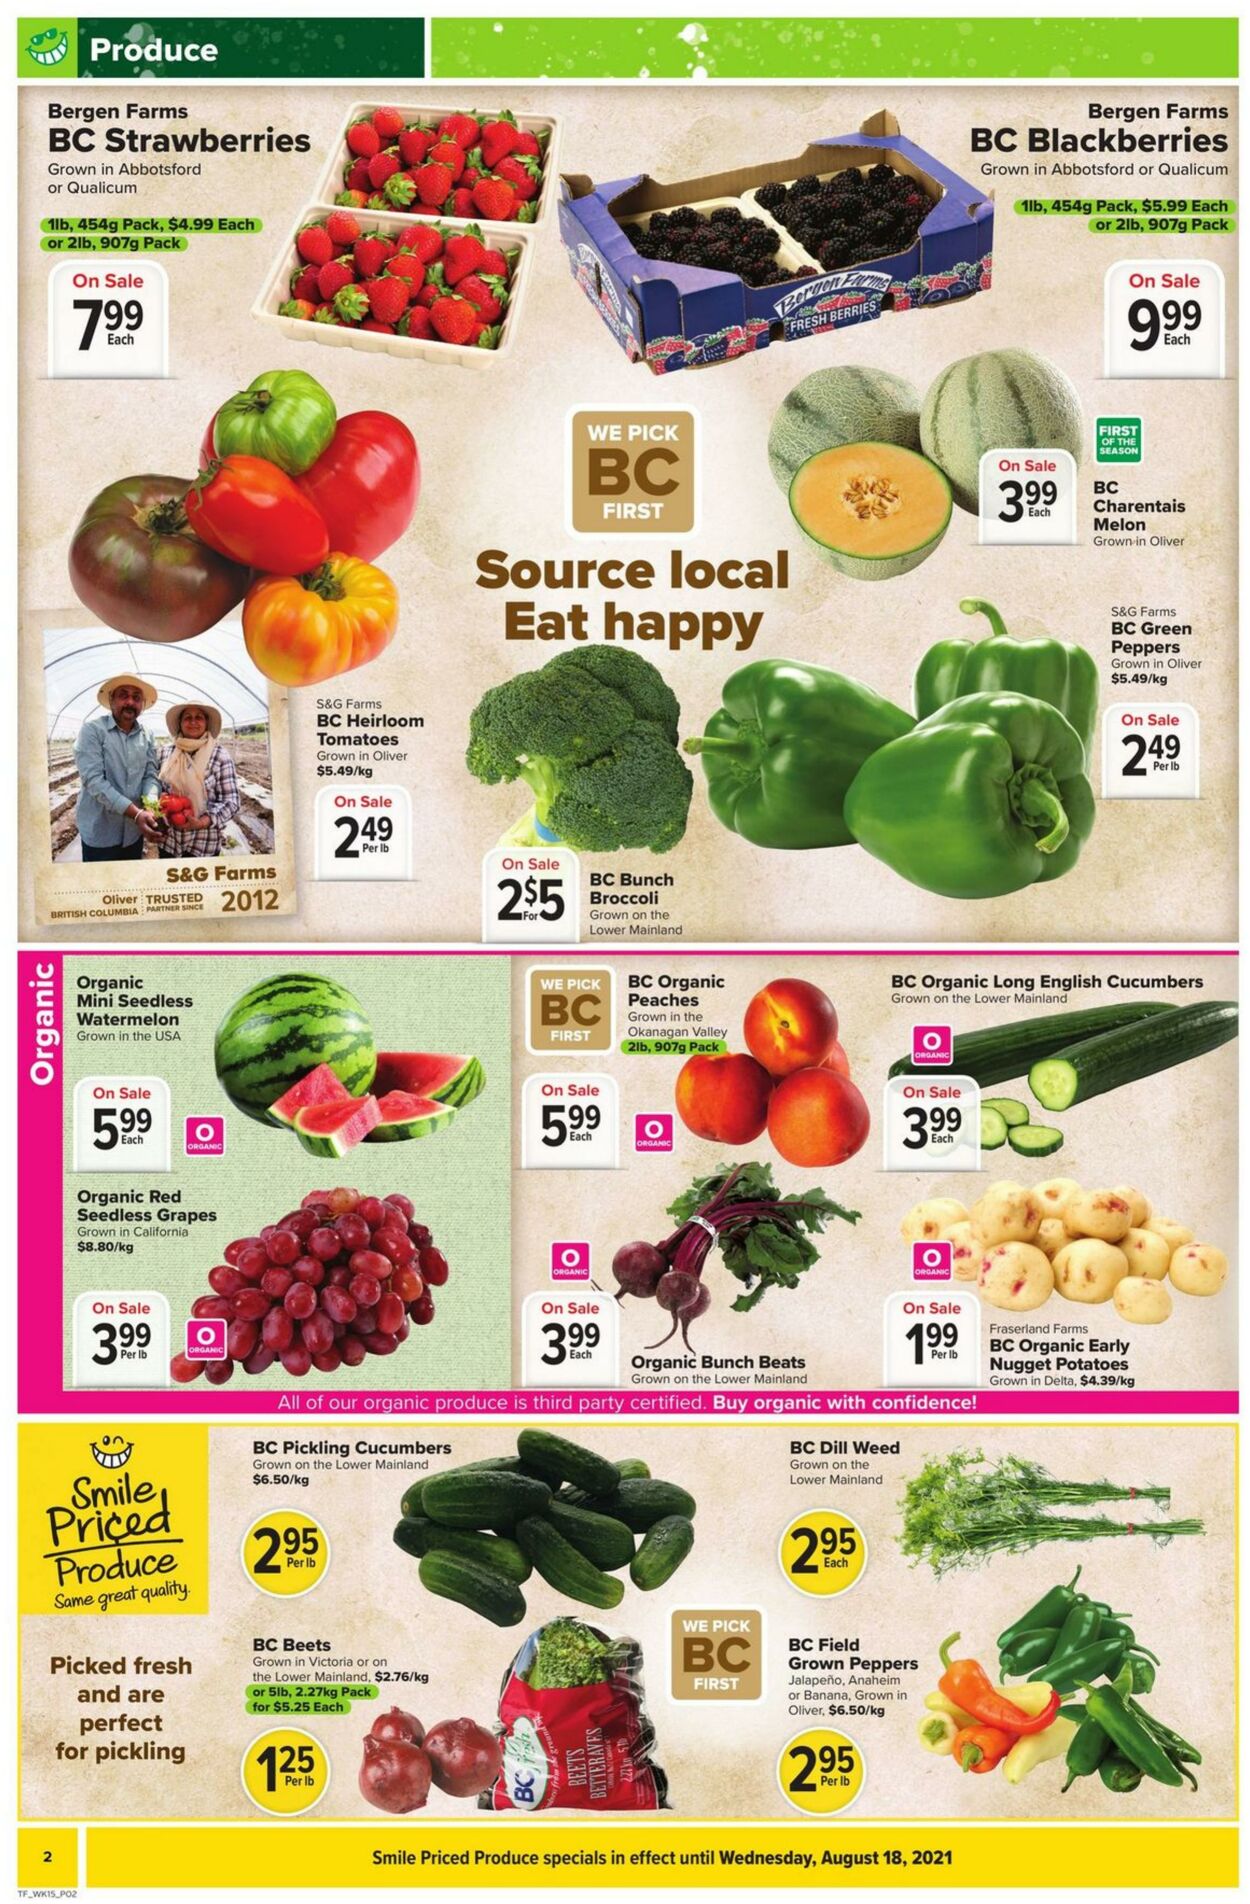 Flyer Thrifty Foods 05.08.2021 - 11.08.2021